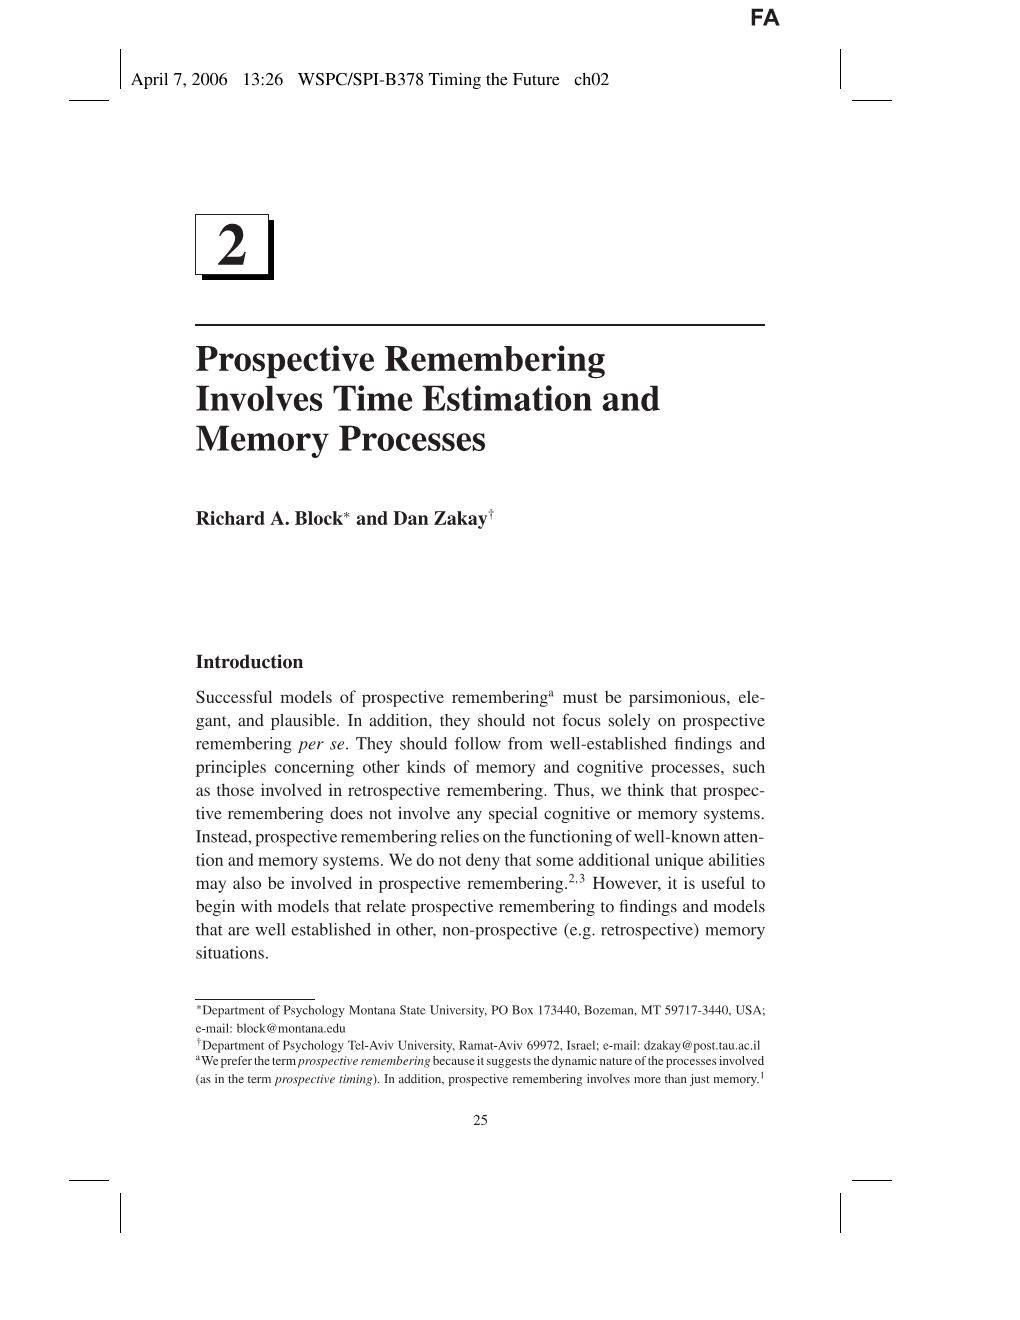 Prospective Remembering Involves Time Estimation and Memory Processes